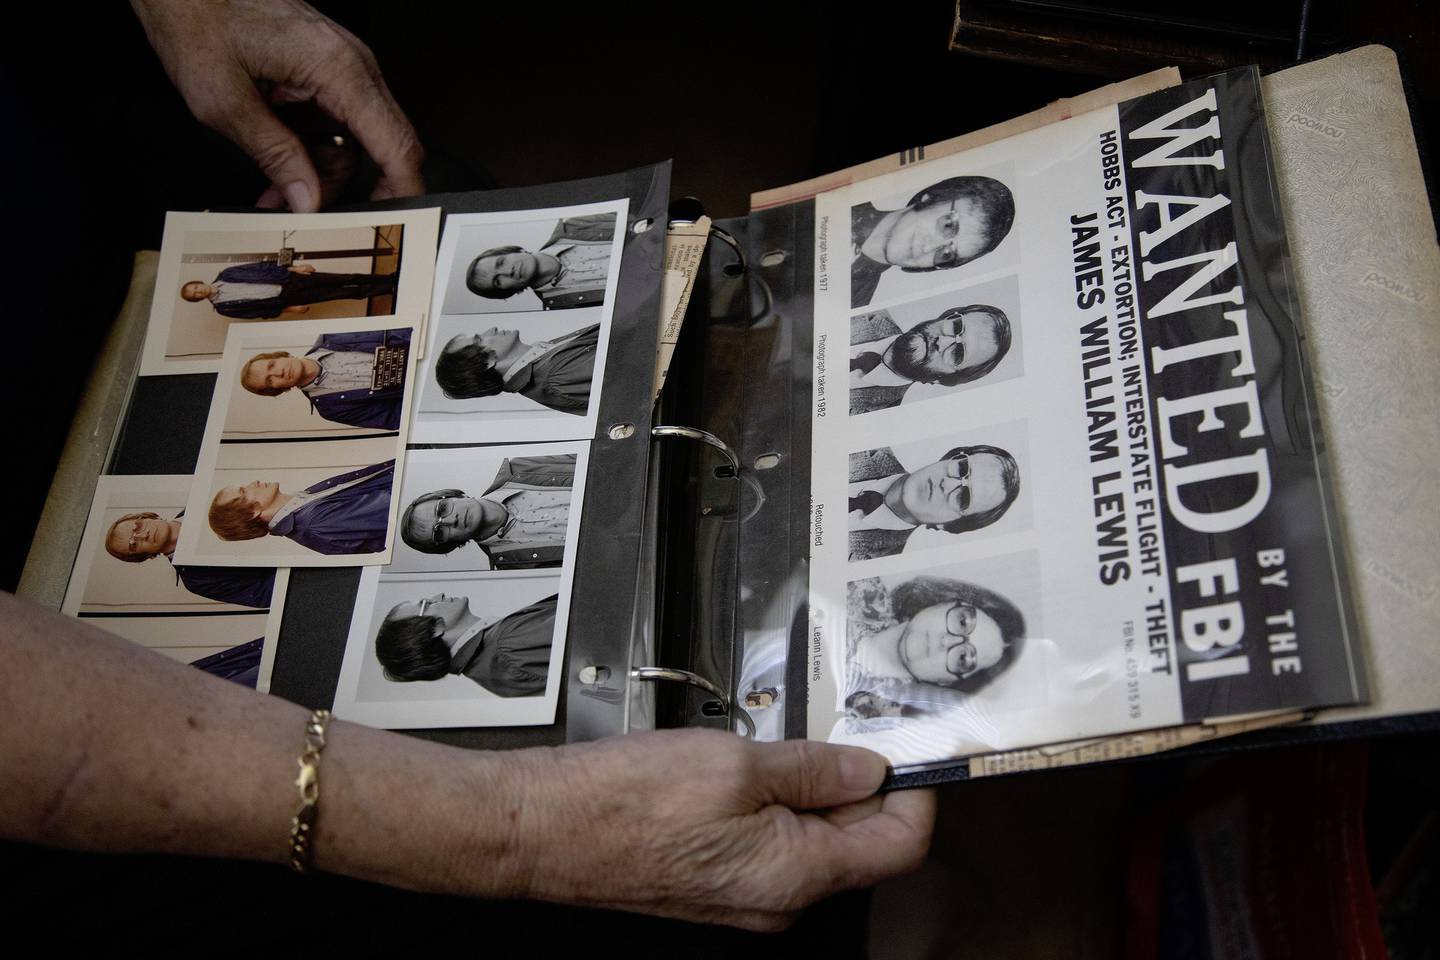 Retired FBI agent Tom Ellis holds an album featuring photos and newspaper clippings about the Tylenol case, including mug shots of James Lewis.